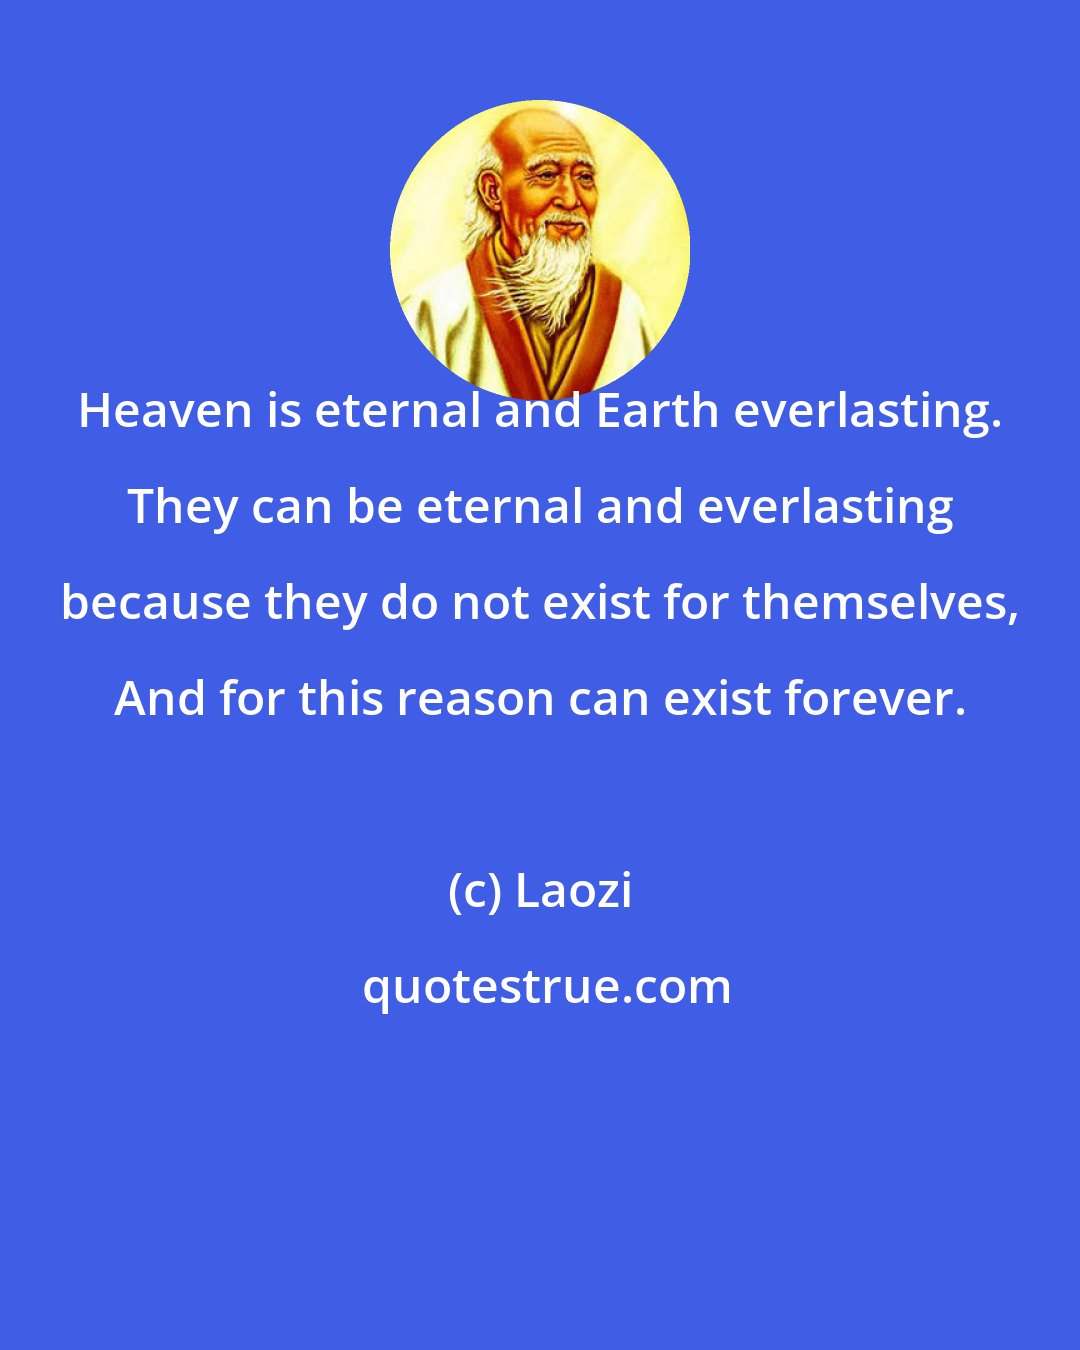 Laozi: Heaven is eternal and Earth everlasting. They can be eternal and everlasting because they do not exist for themselves, And for this reason can exist forever.